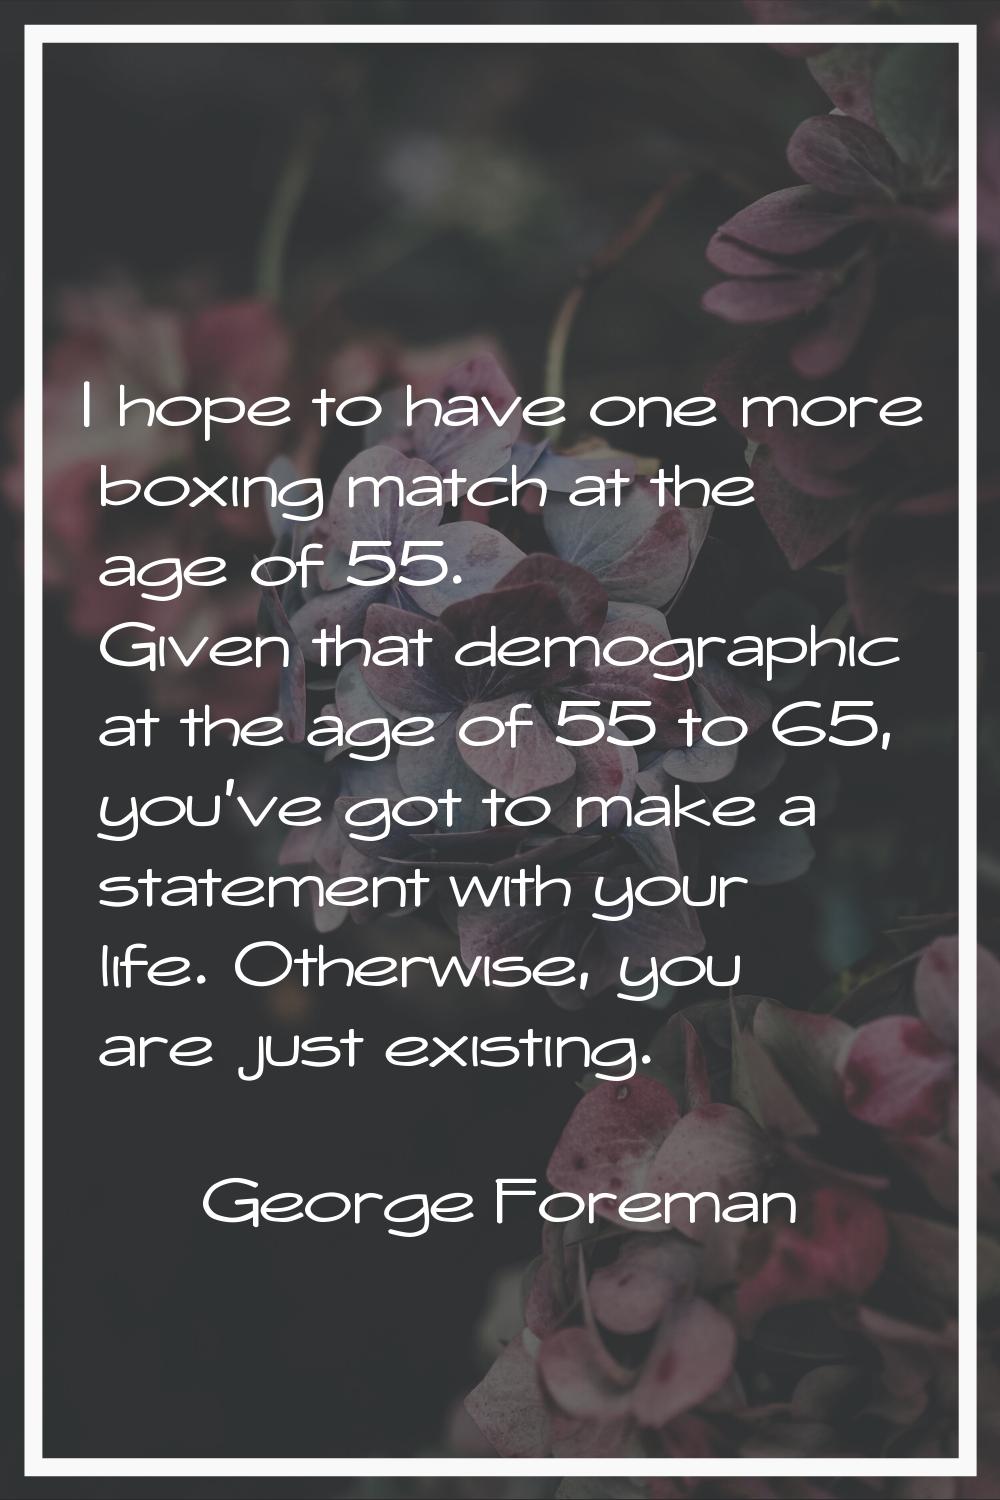 I hope to have one more boxing match at the age of 55. Given that demographic at the age of 55 to 6